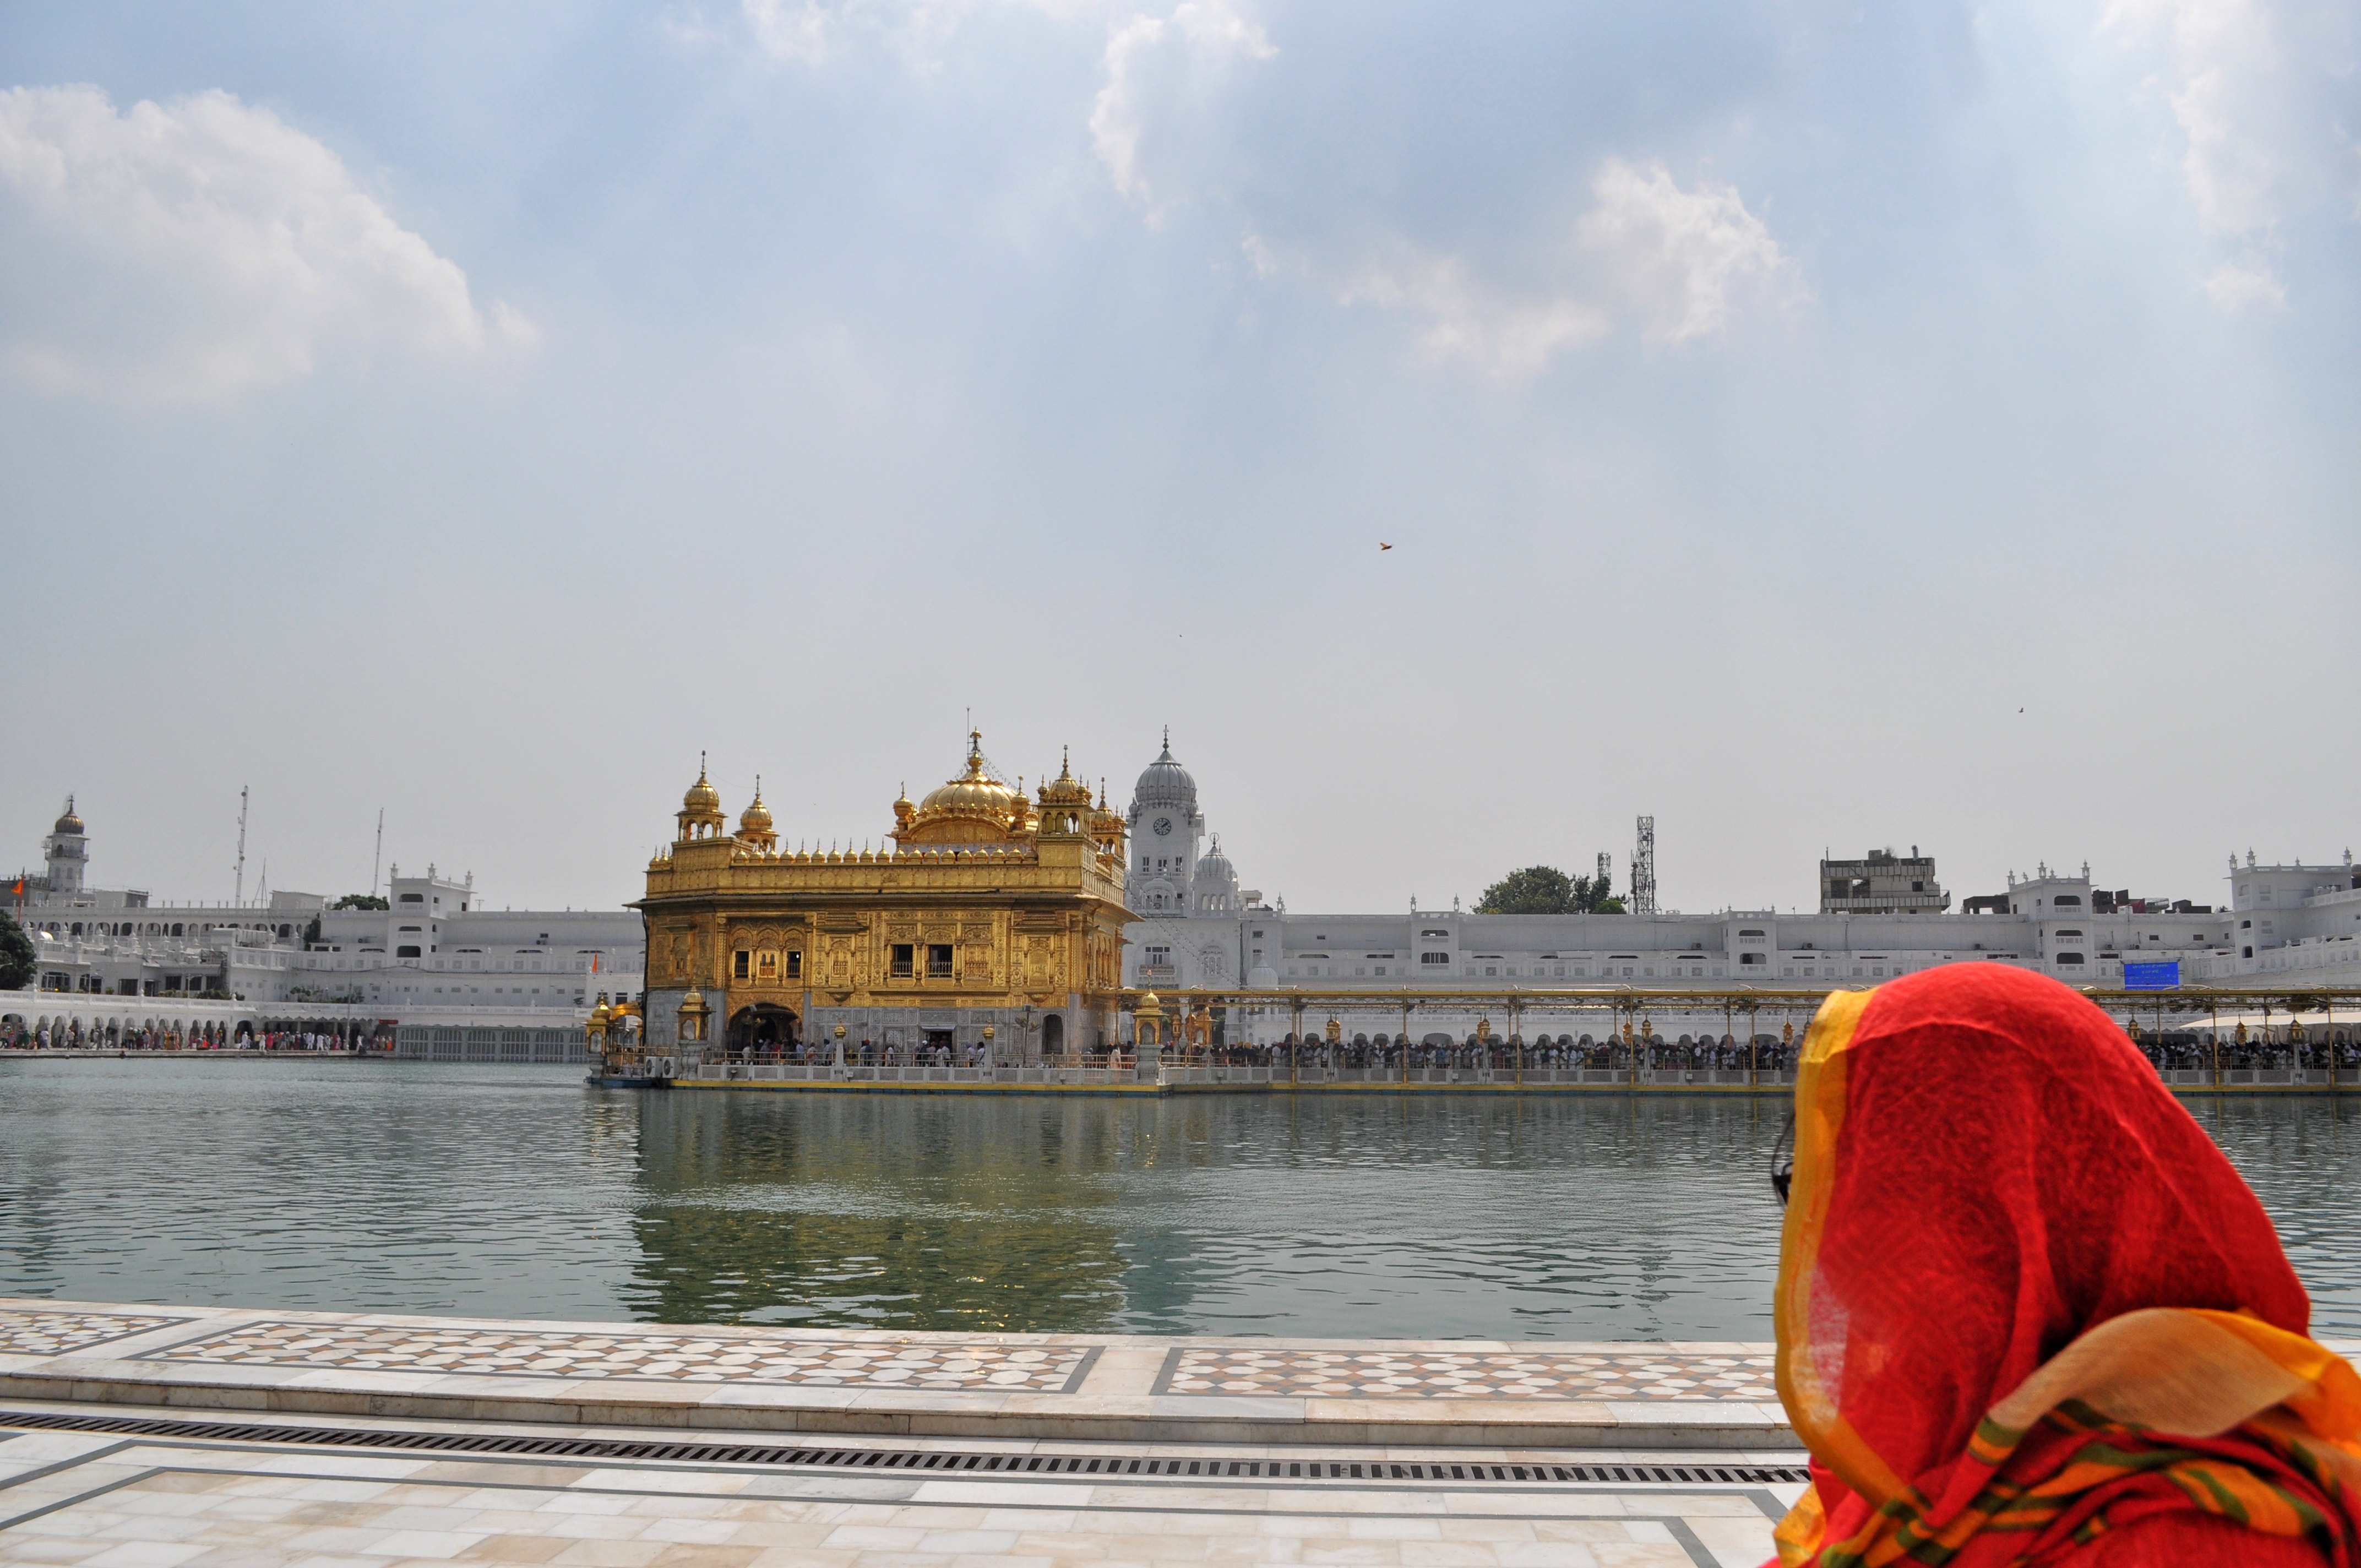 Mesmerised by the Golden Temple